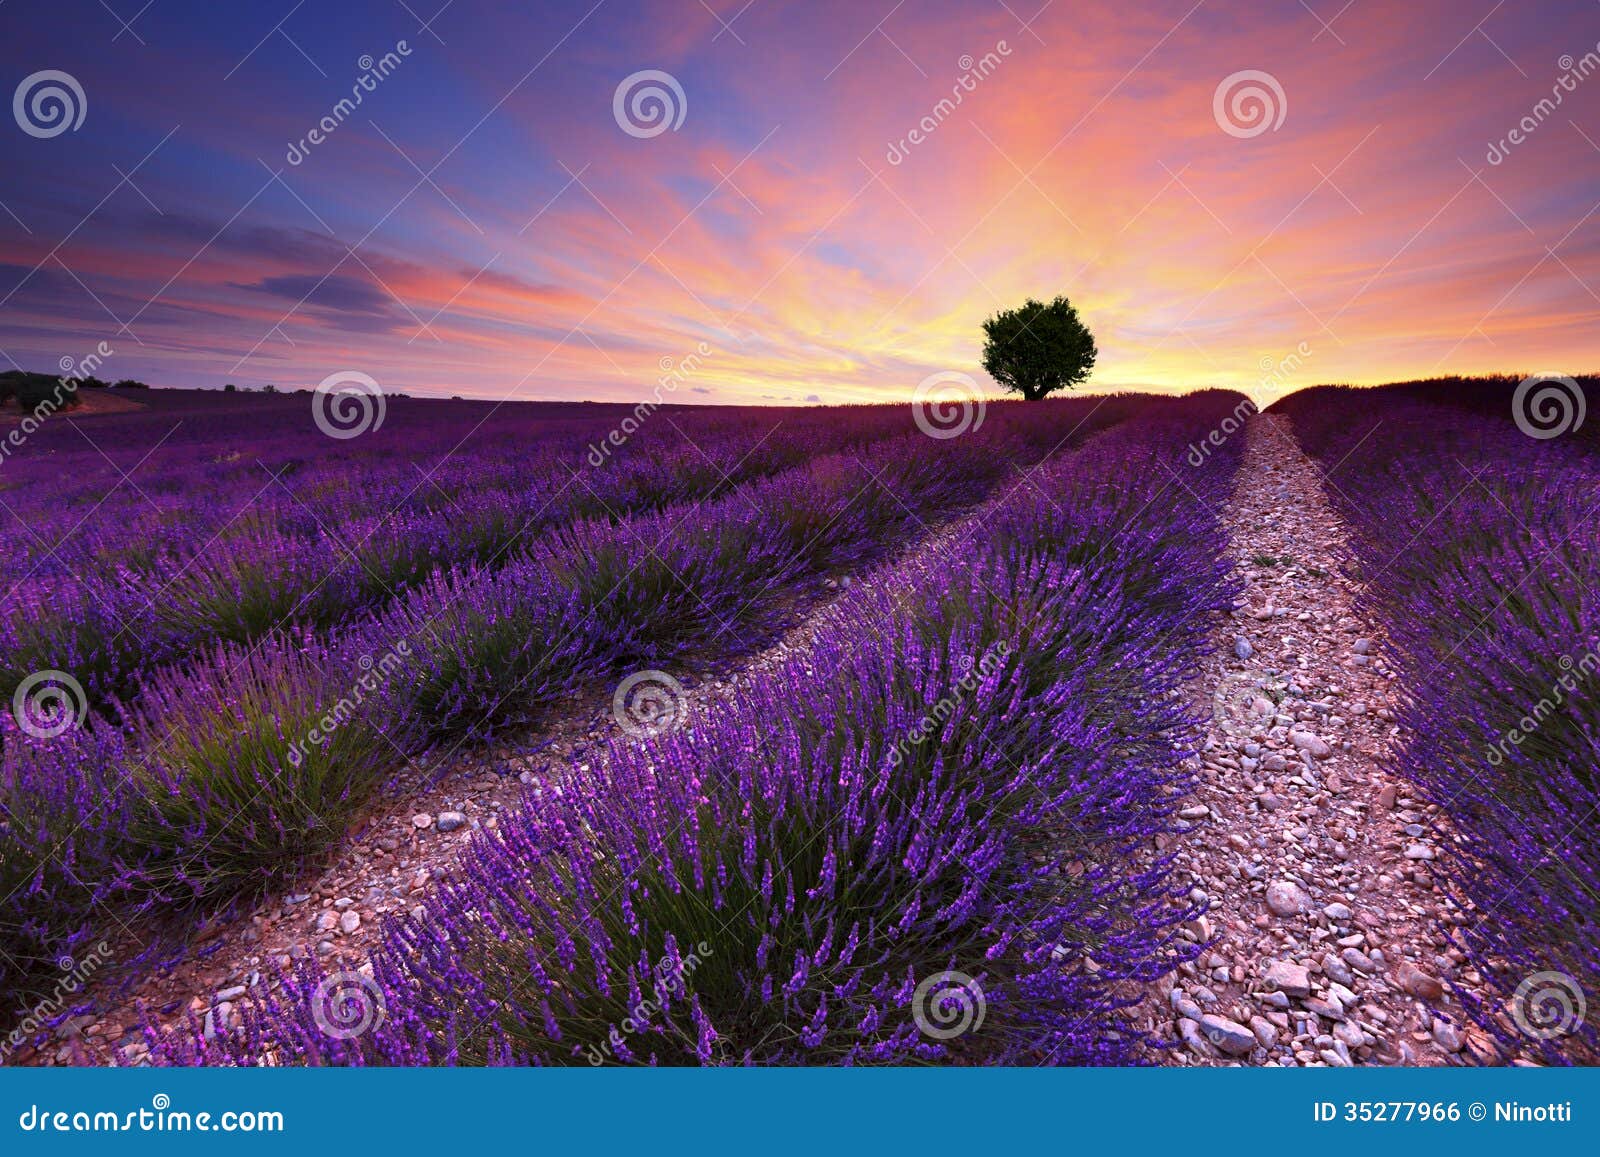 Lavender stock photo. Image of lavander, country, land - 35277966